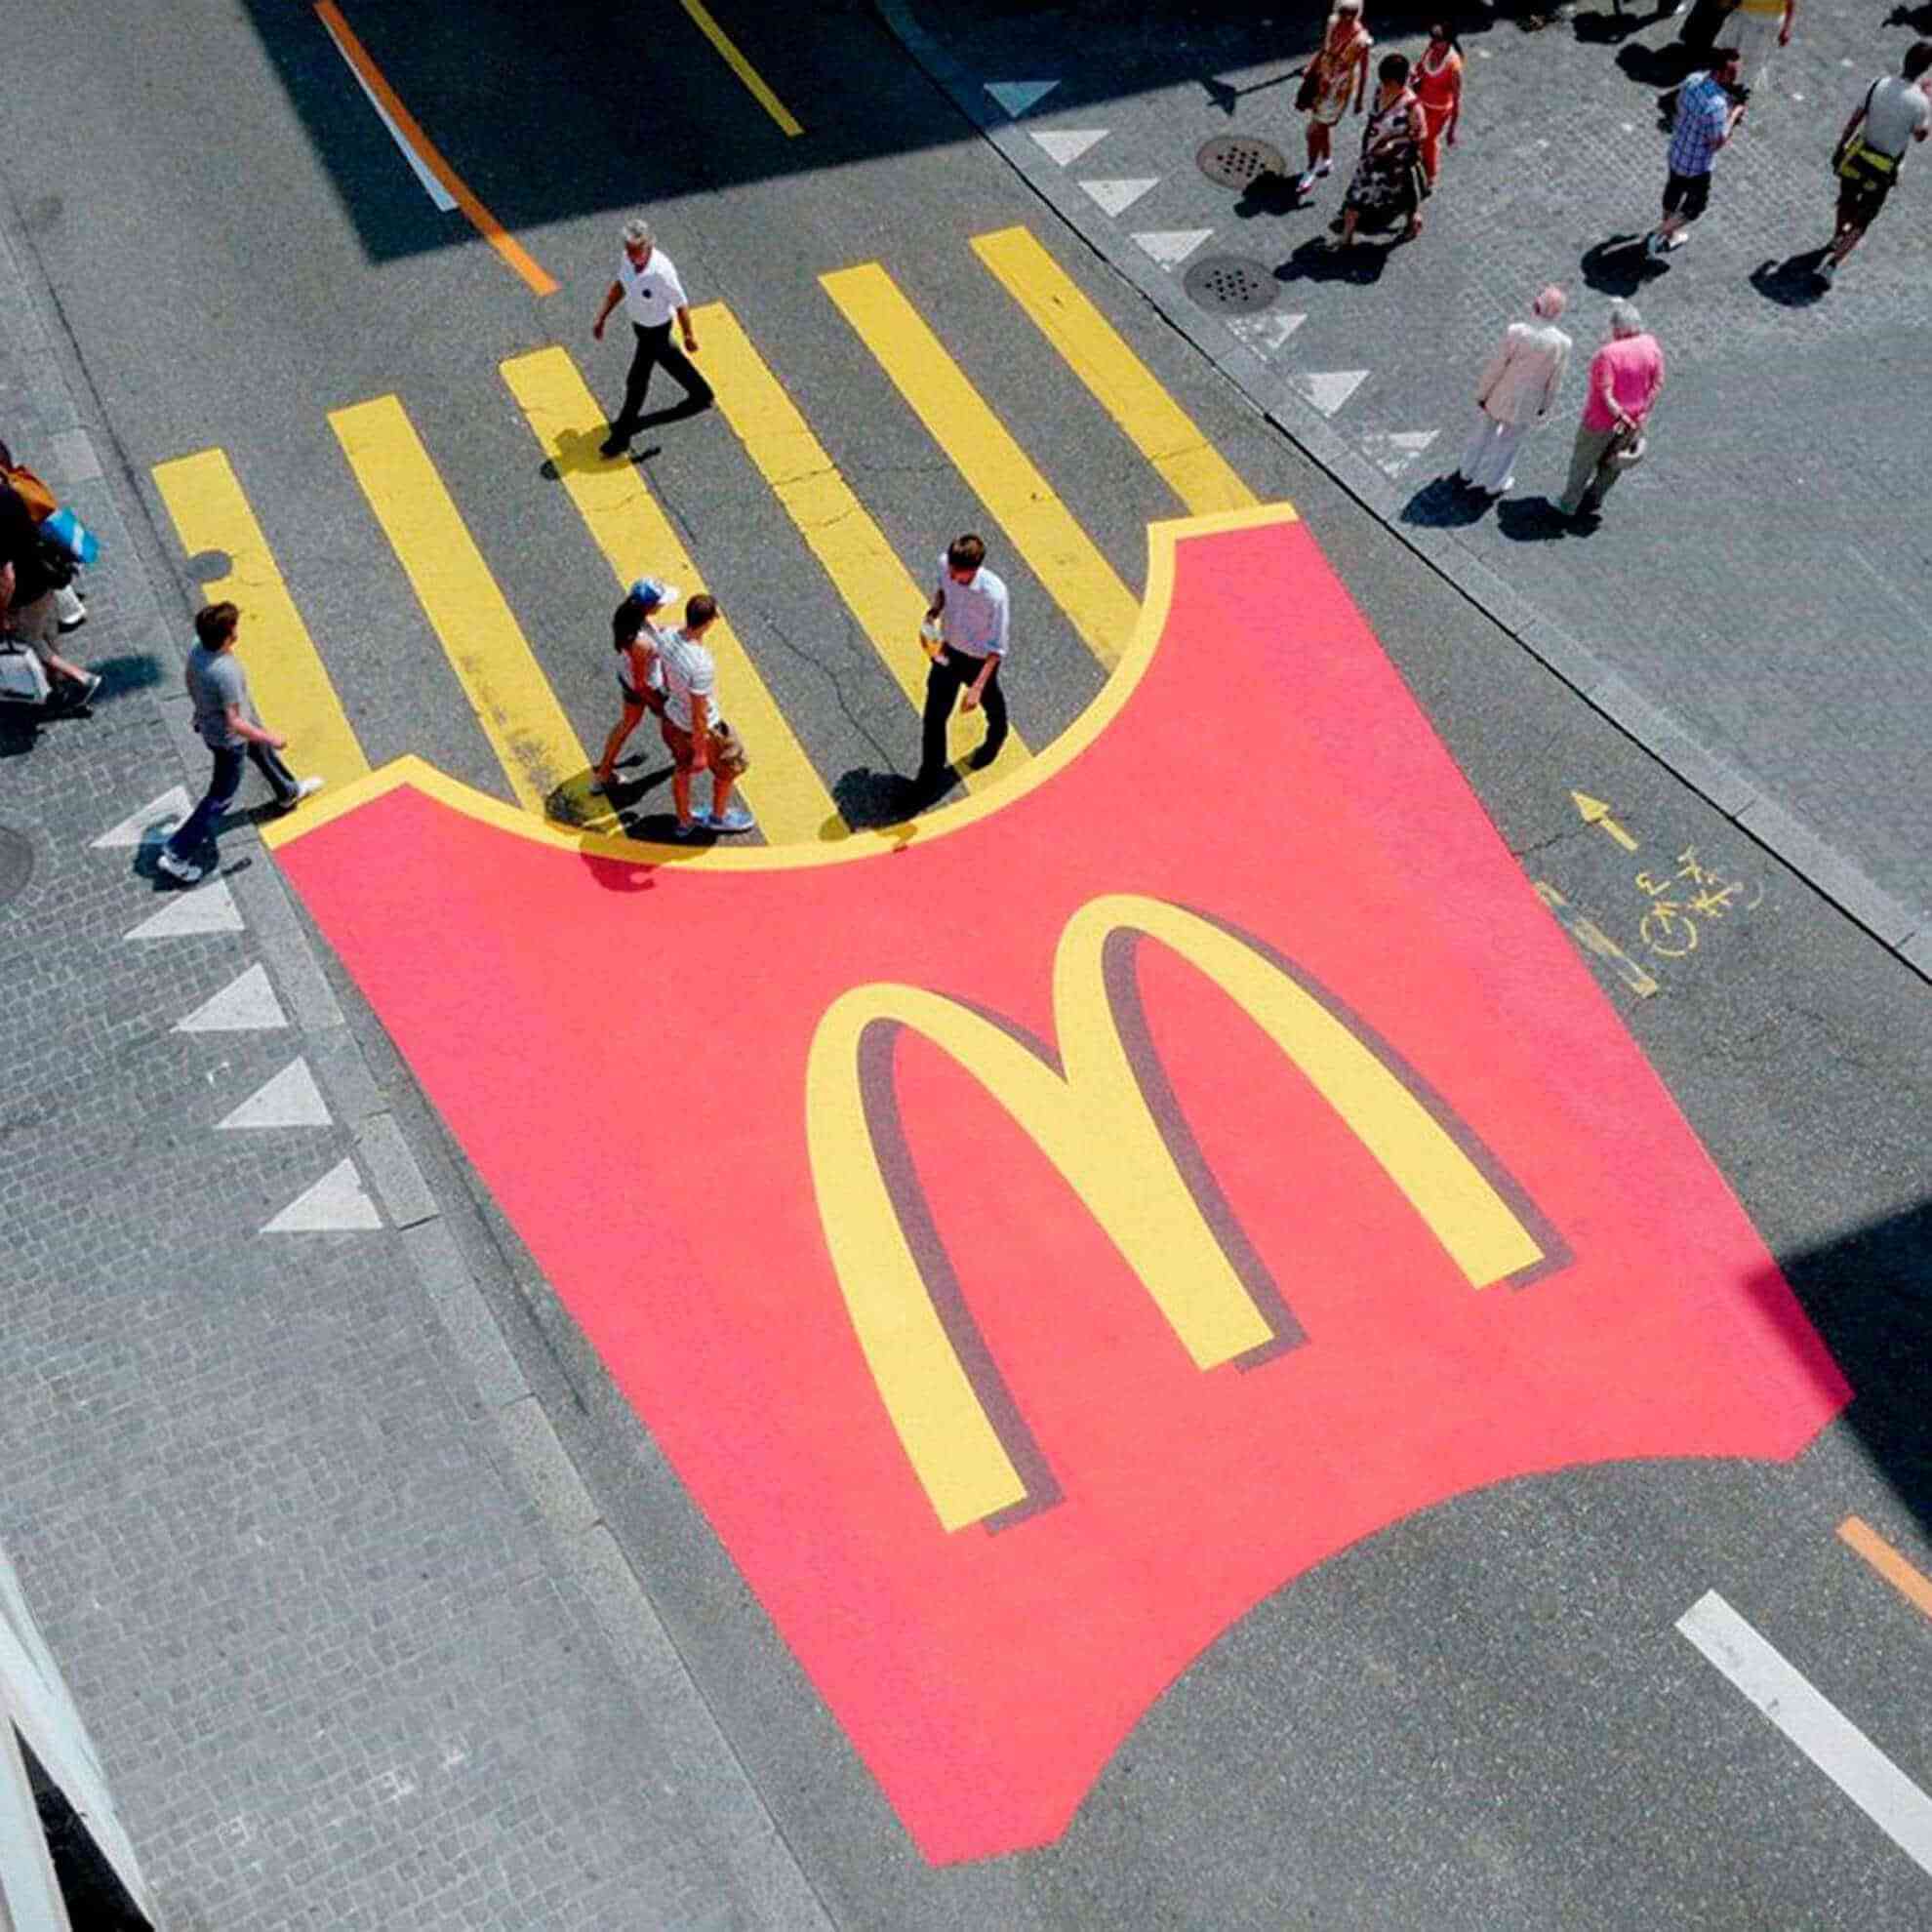 A photo taken from a very high angle looks down at the street, showing that a pedestrian crosswalk has been turned into a mcdonalds advertisement. The ordinary yellow crosswalk lines now represent french fries, coming out of a large red mcdonalds fry cup.